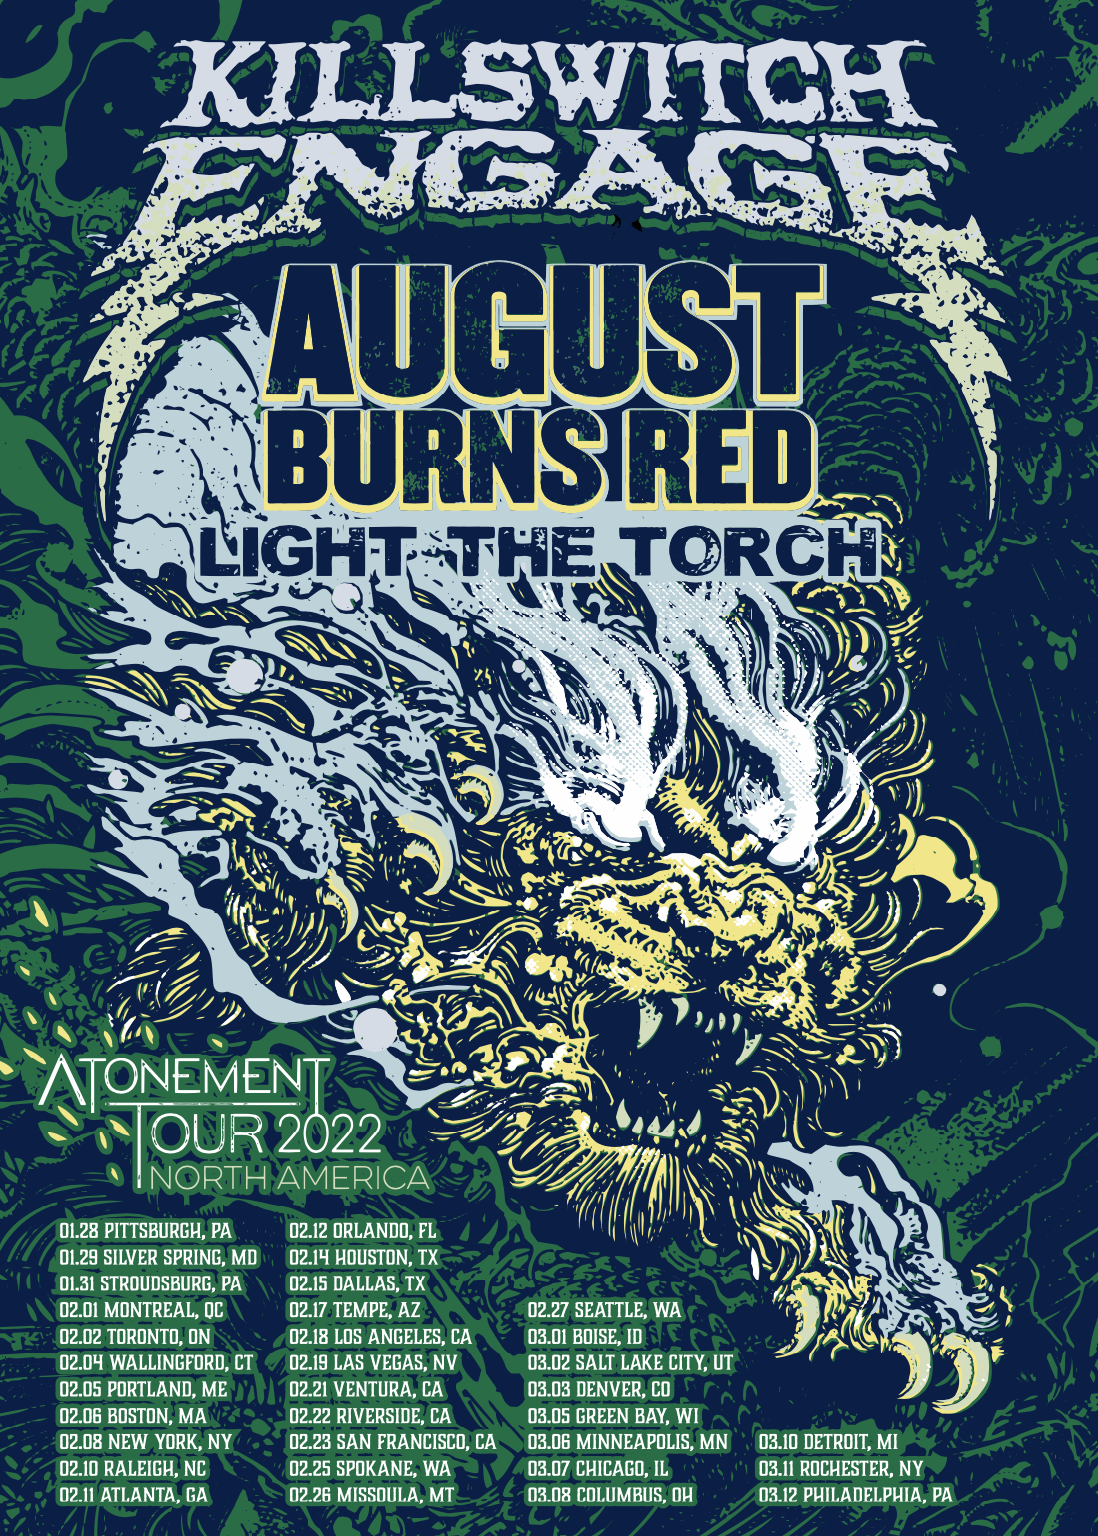 Killswitch Engage Announce Rescheduled Winter 2022 Headline "Atonement" Tour With August Burns Red + Light the Torch